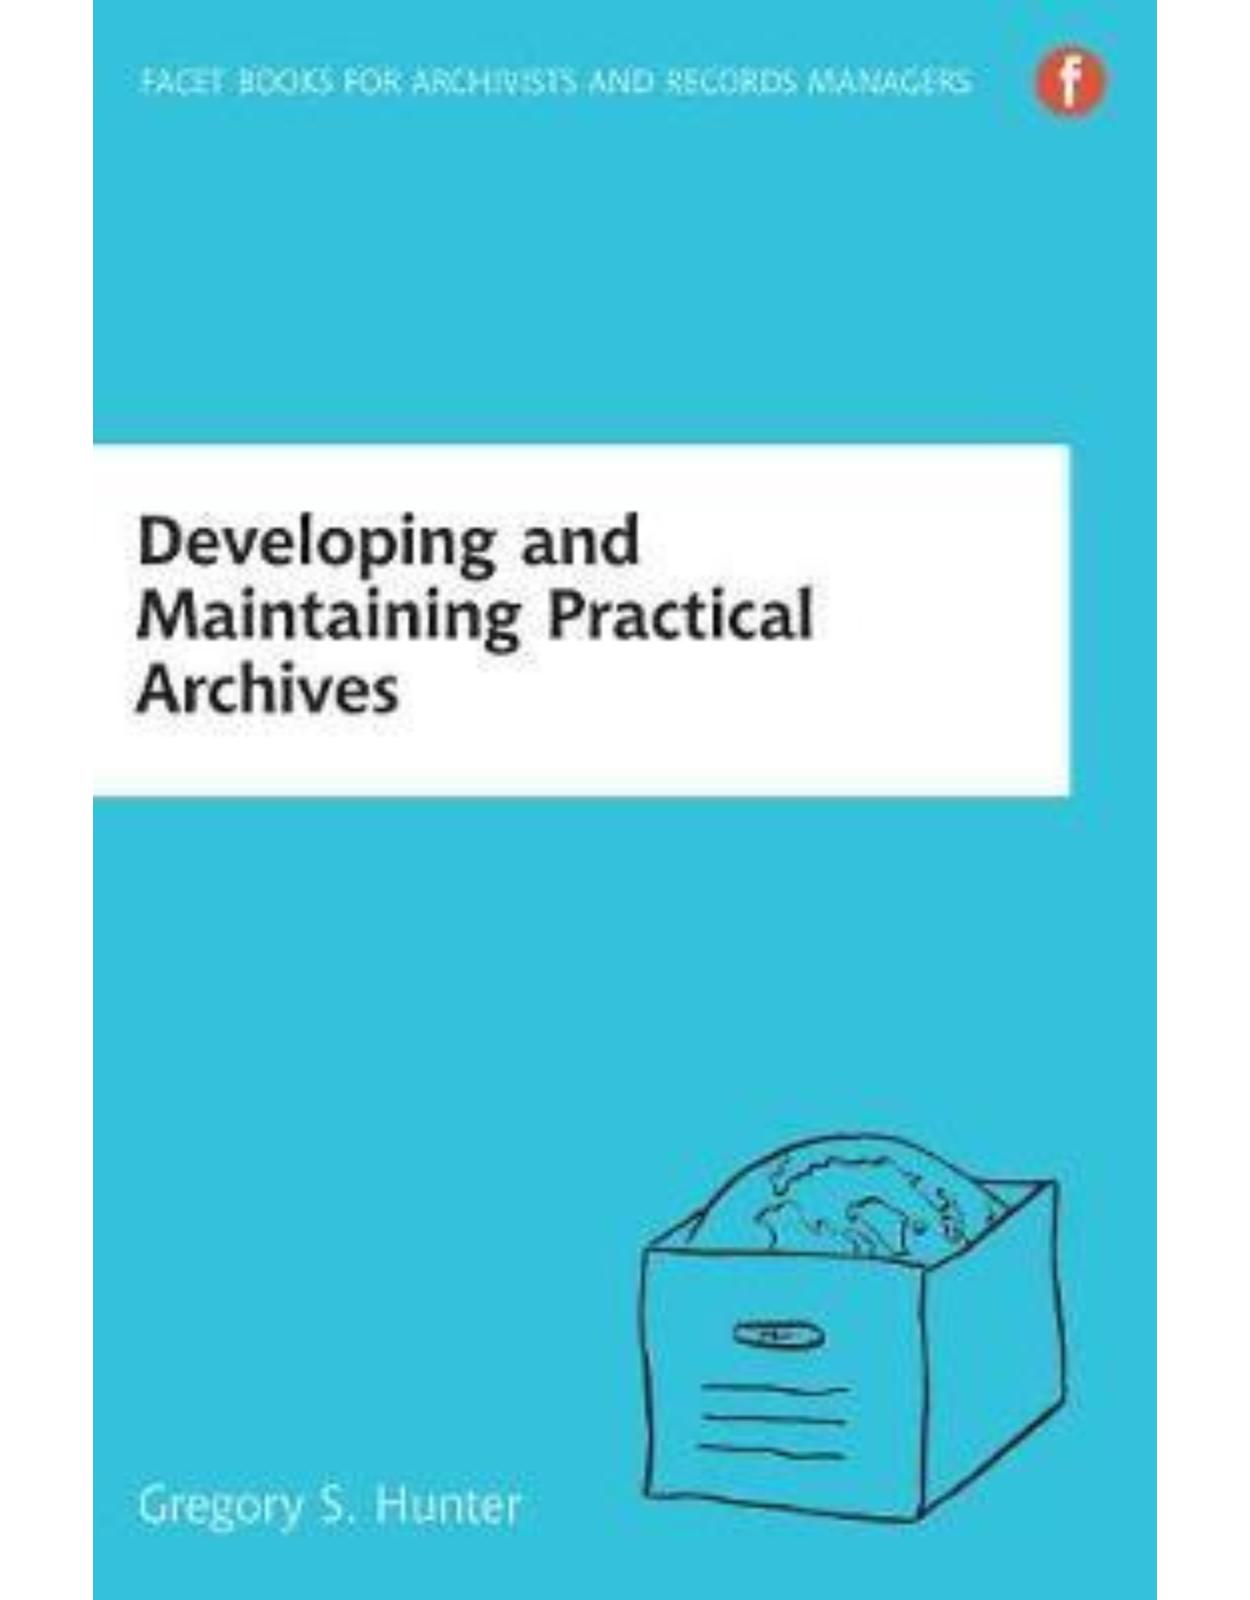 Developing and Maintaining Practical Archives, 3rd edition